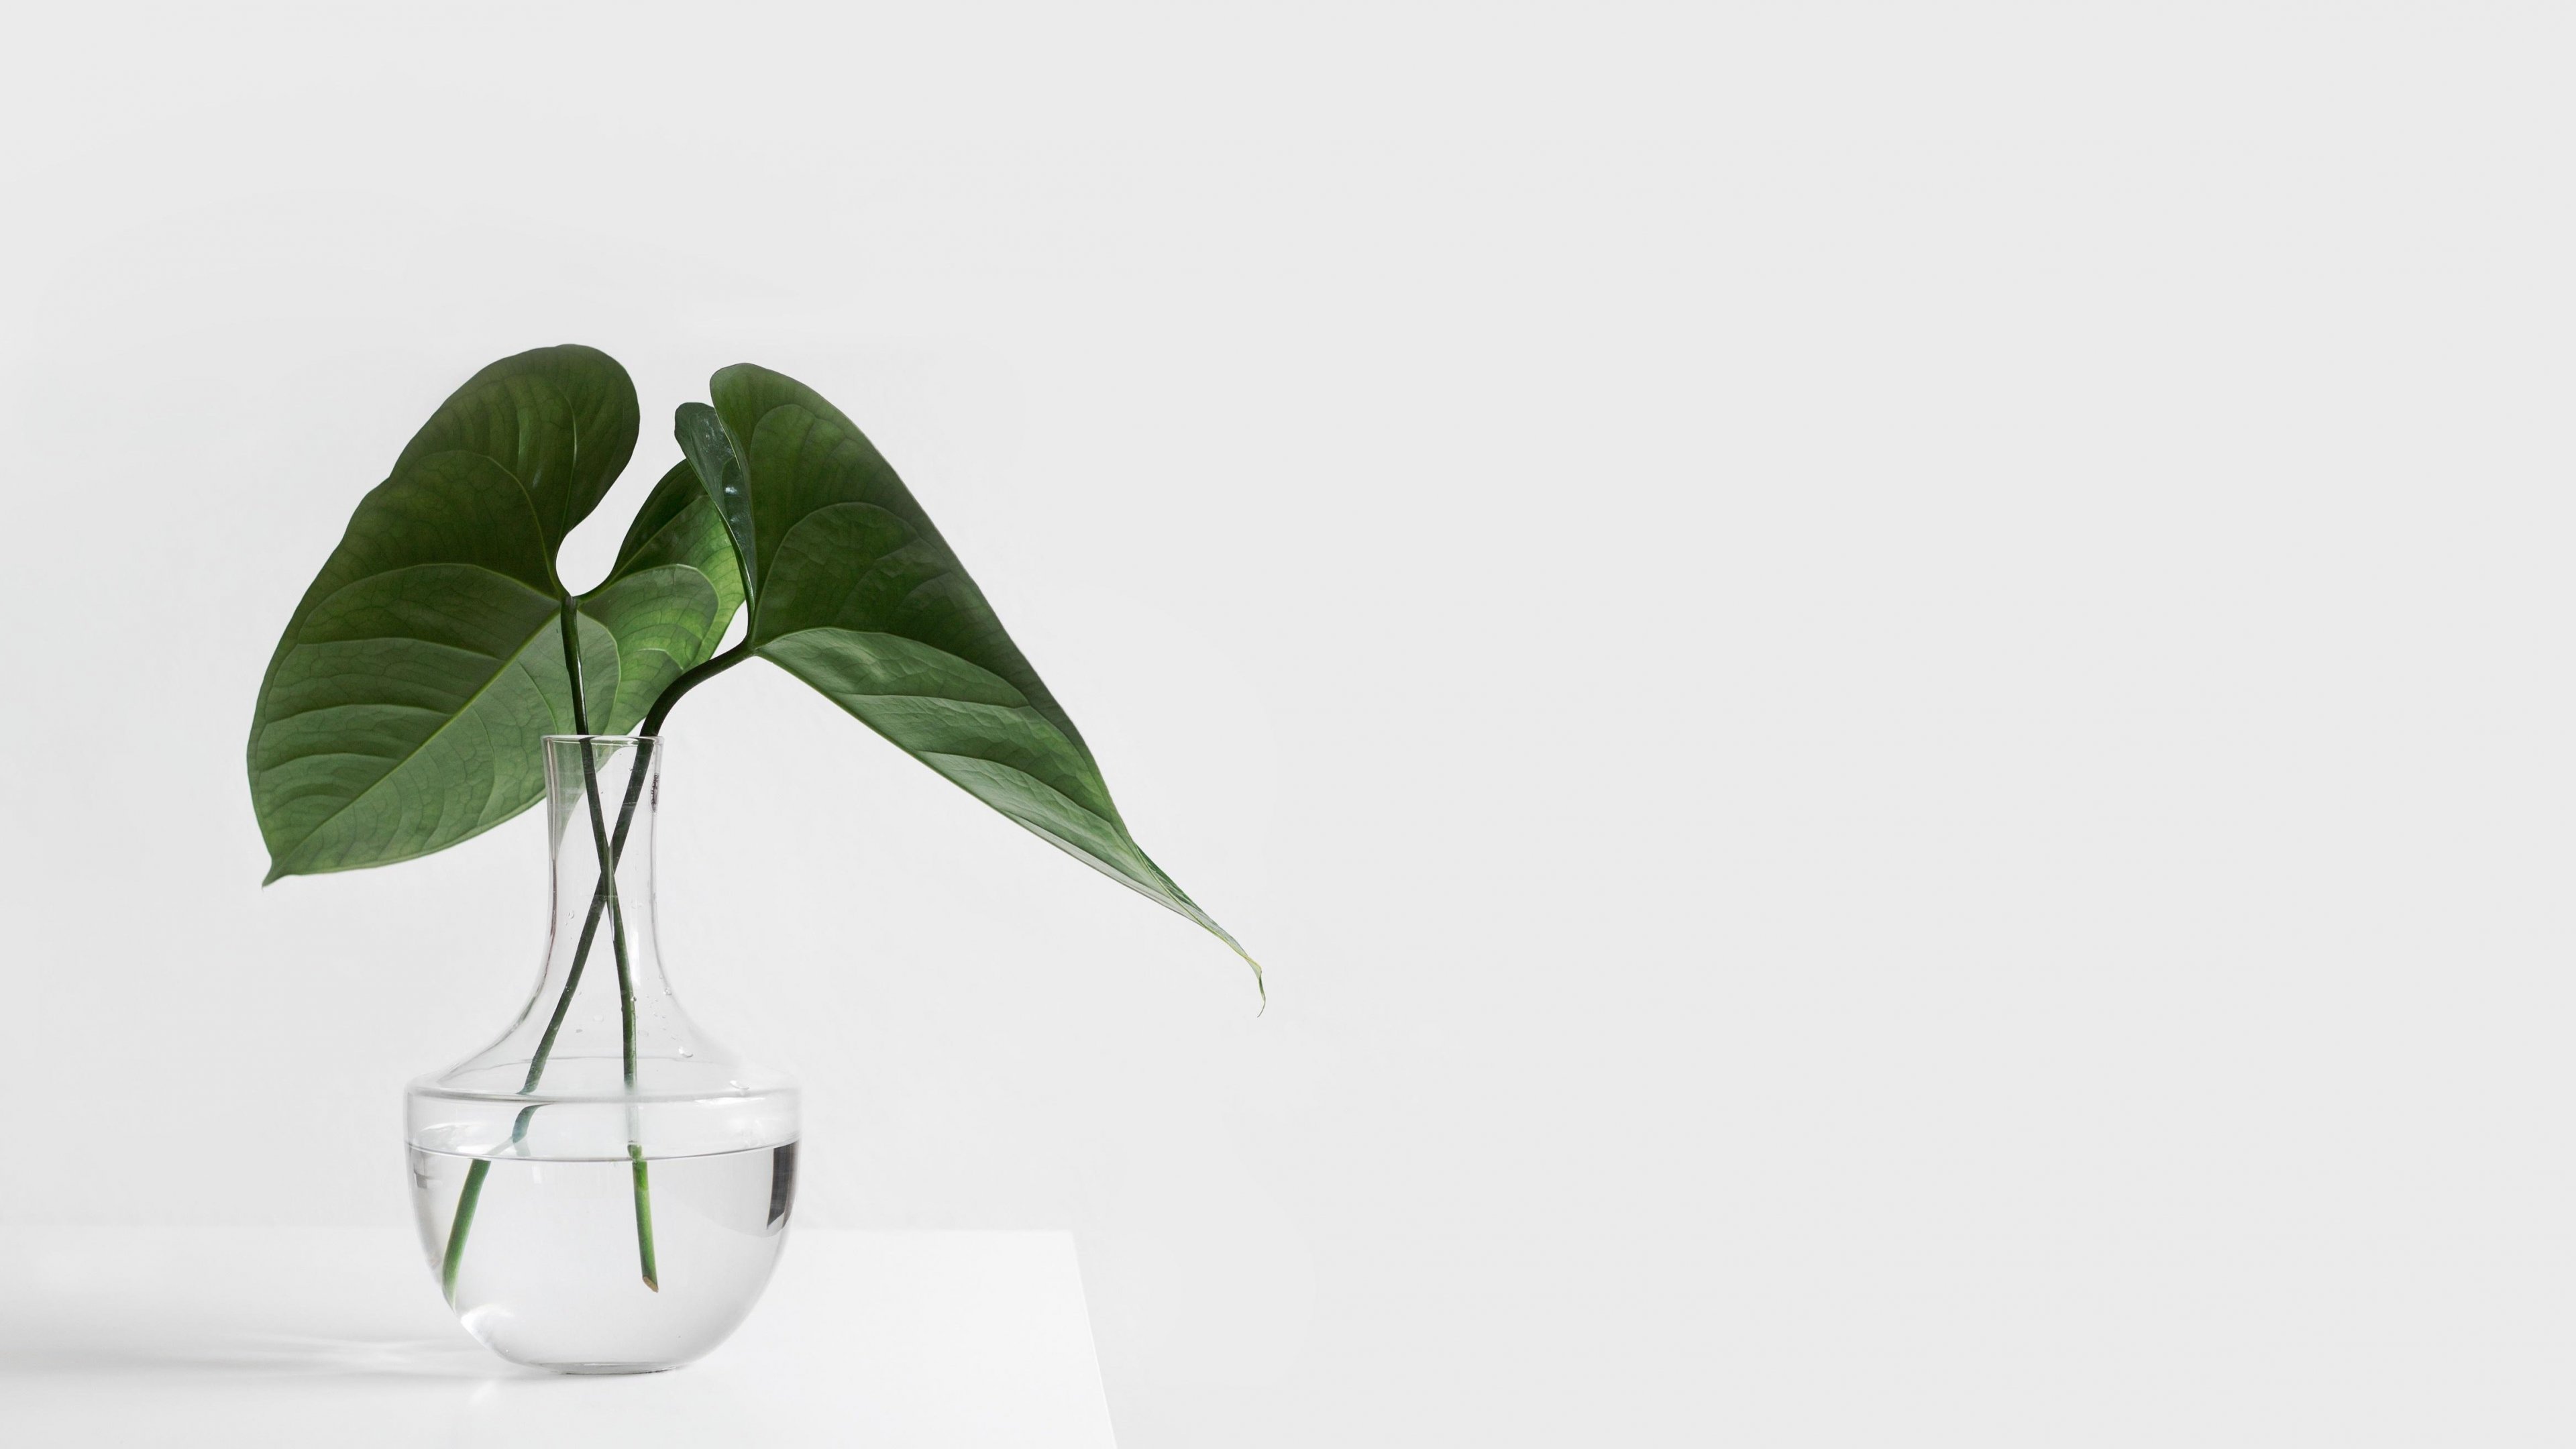 Minimalist Aesthetic Plant in Clear Vase Wallpaper - iPhone, Android & Desktop  Backgrounds